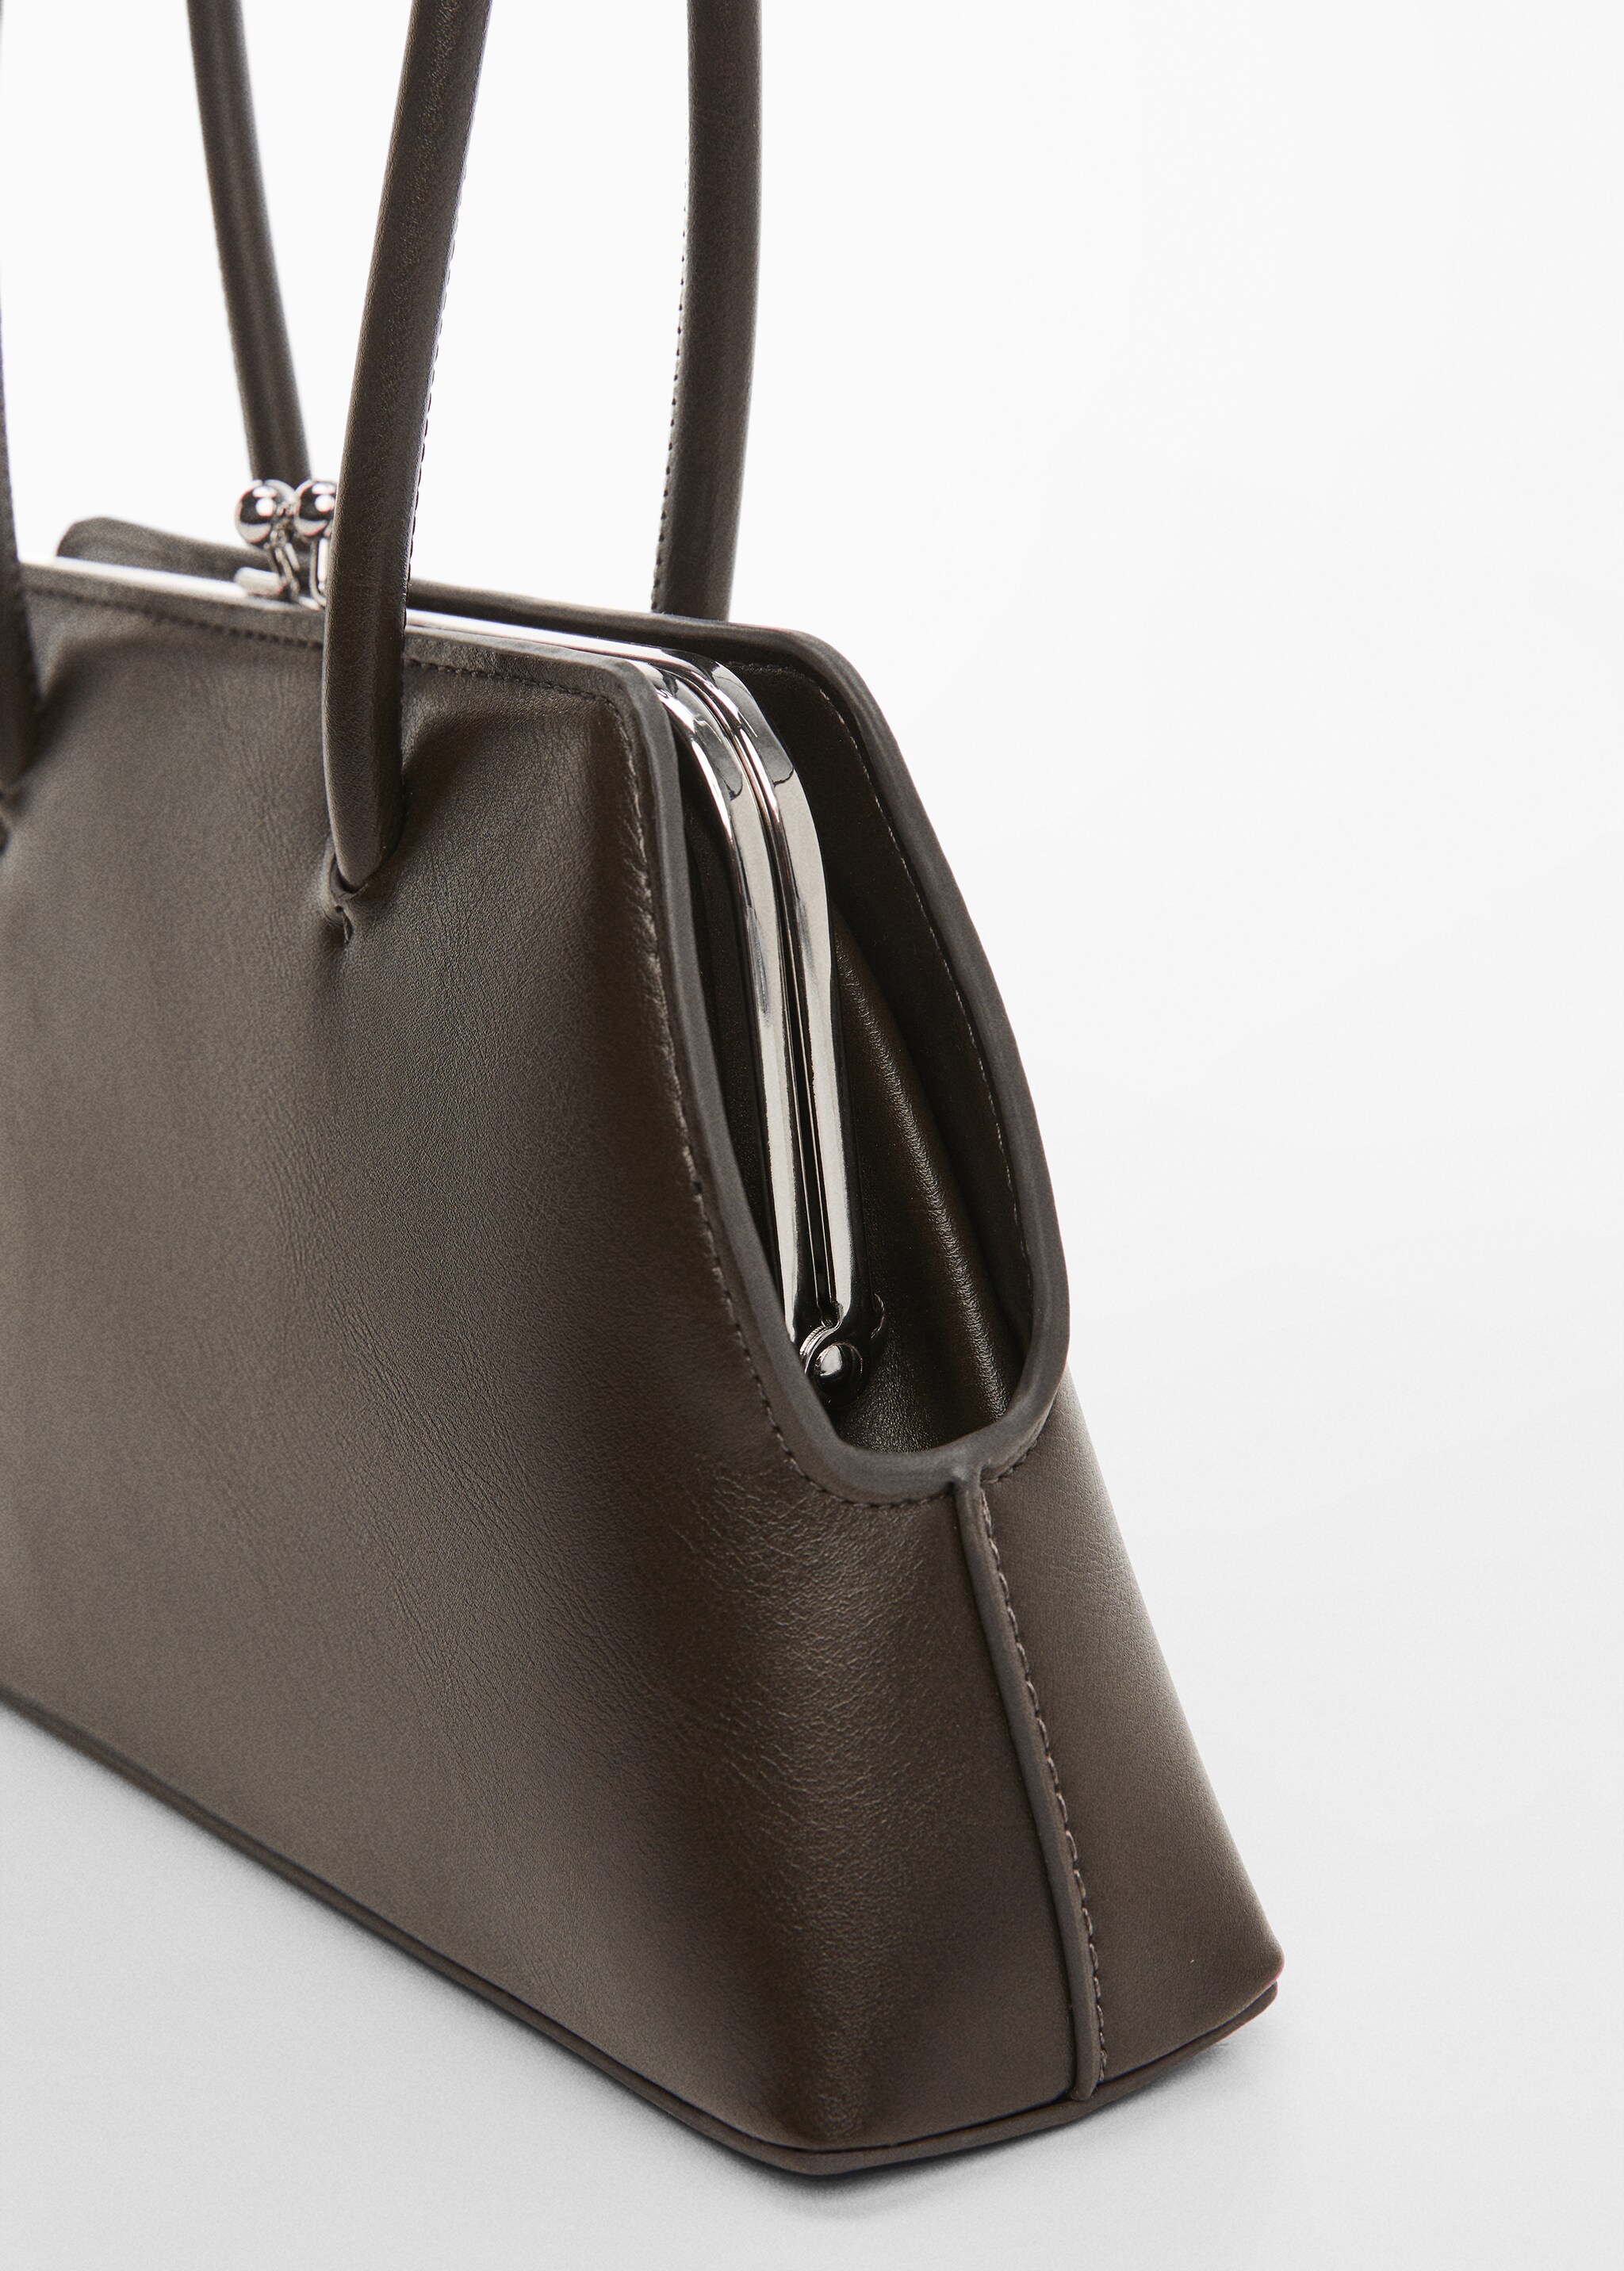 Double strap bag - Details of the article 1